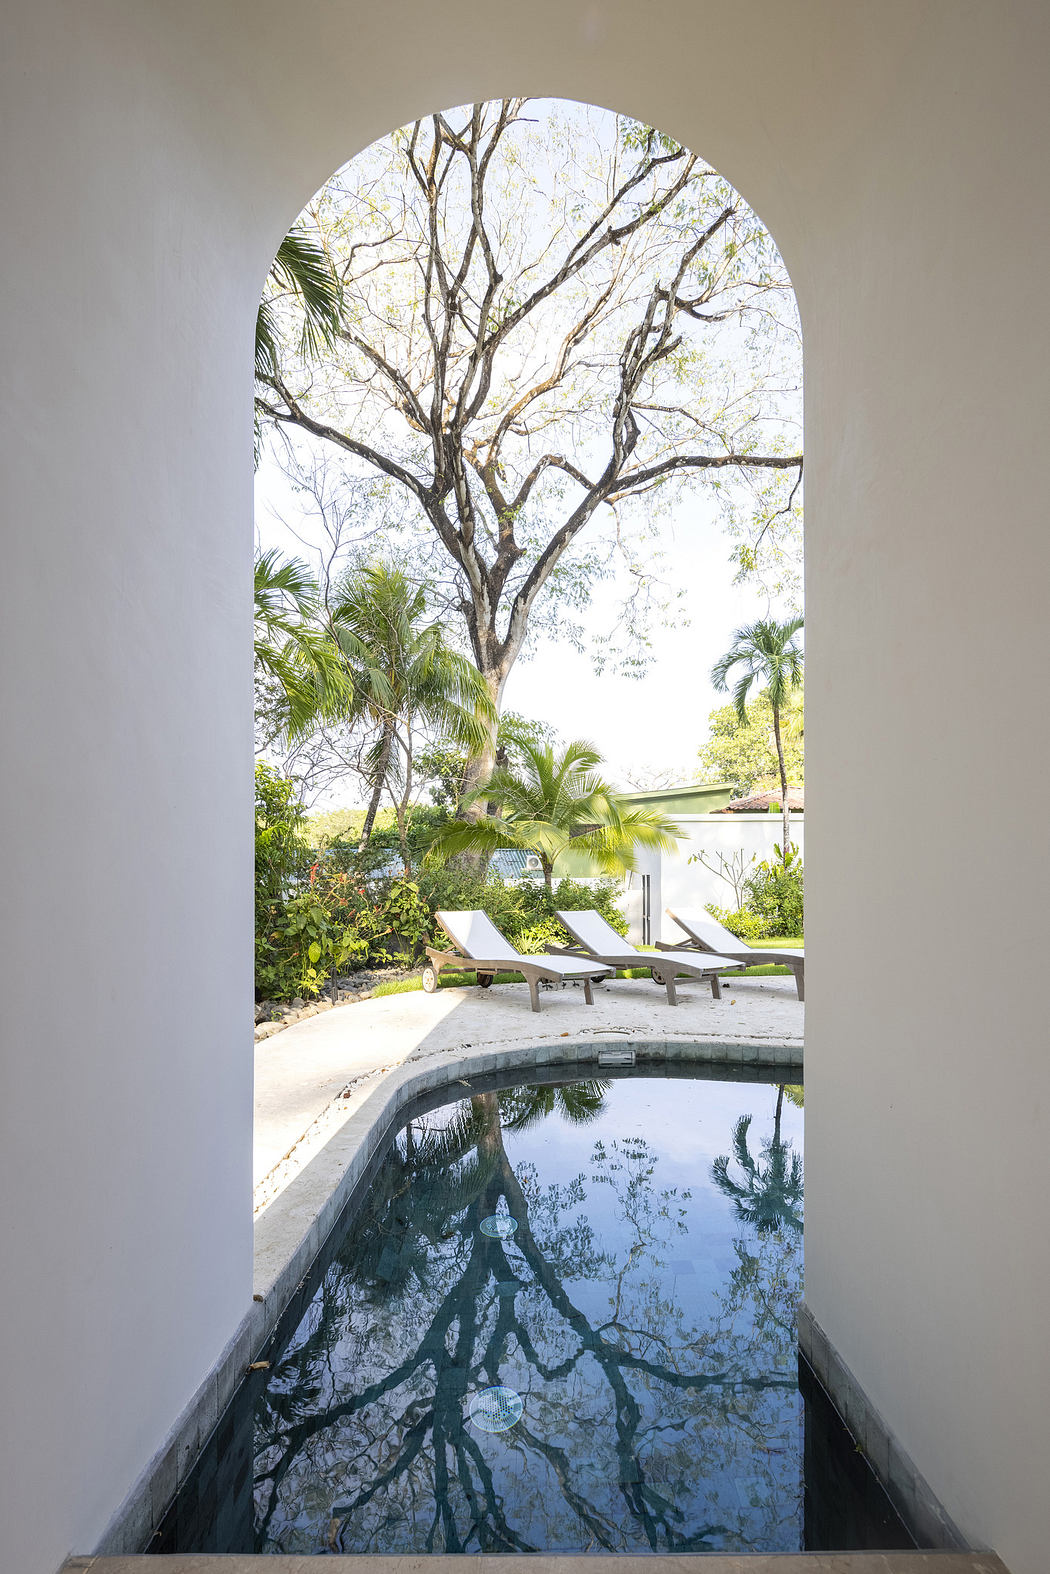 Arched doorway framing an outdoor pool with a sun lounger and large tree in